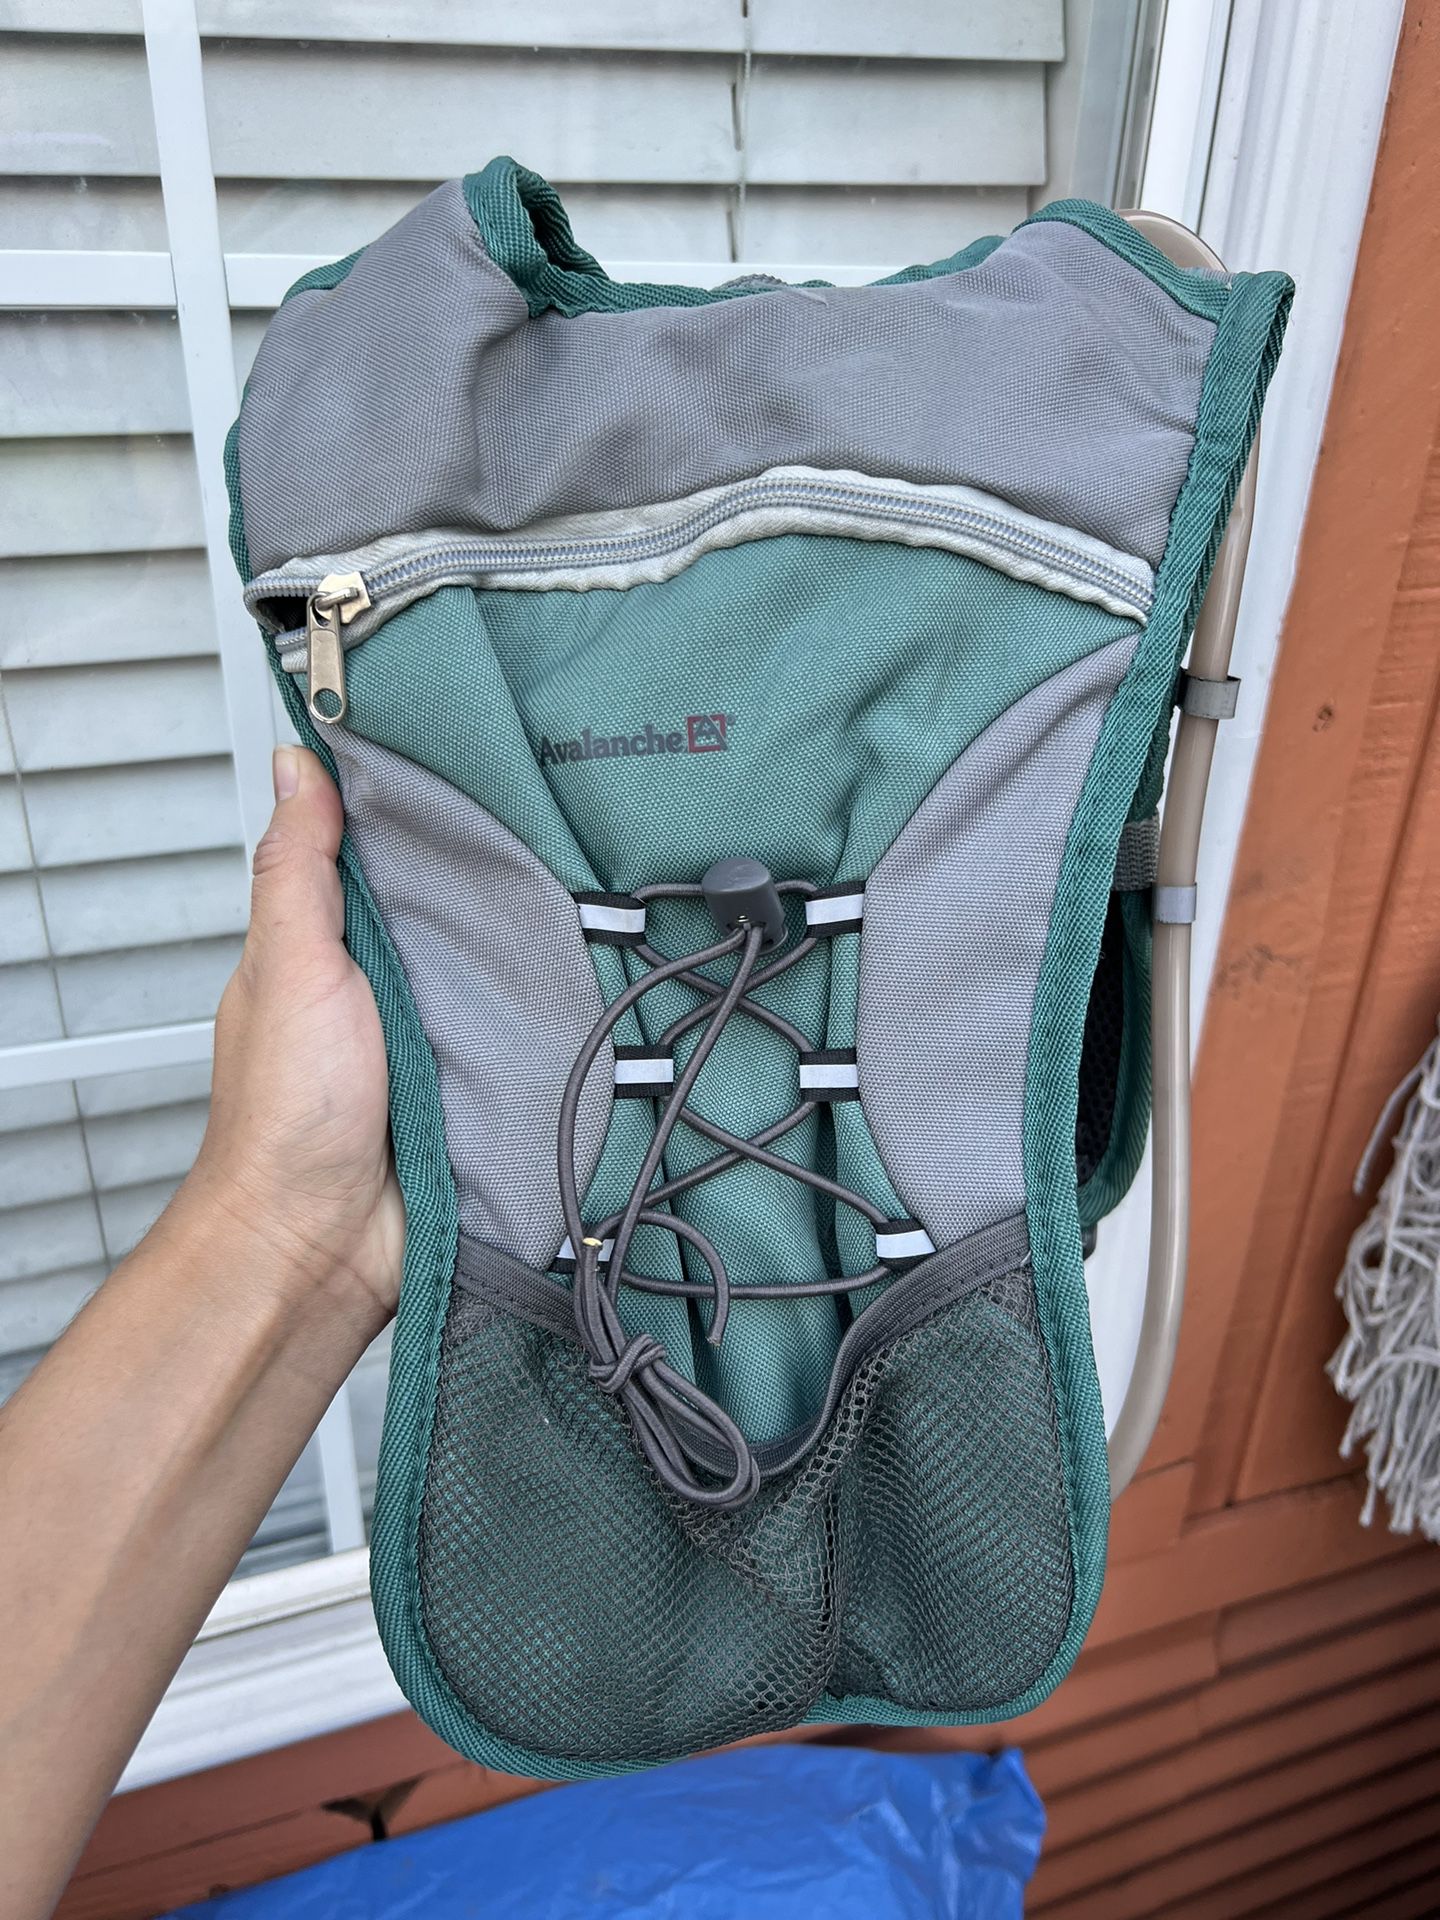 Avalanche Brand Hydration Backpack Hydropack